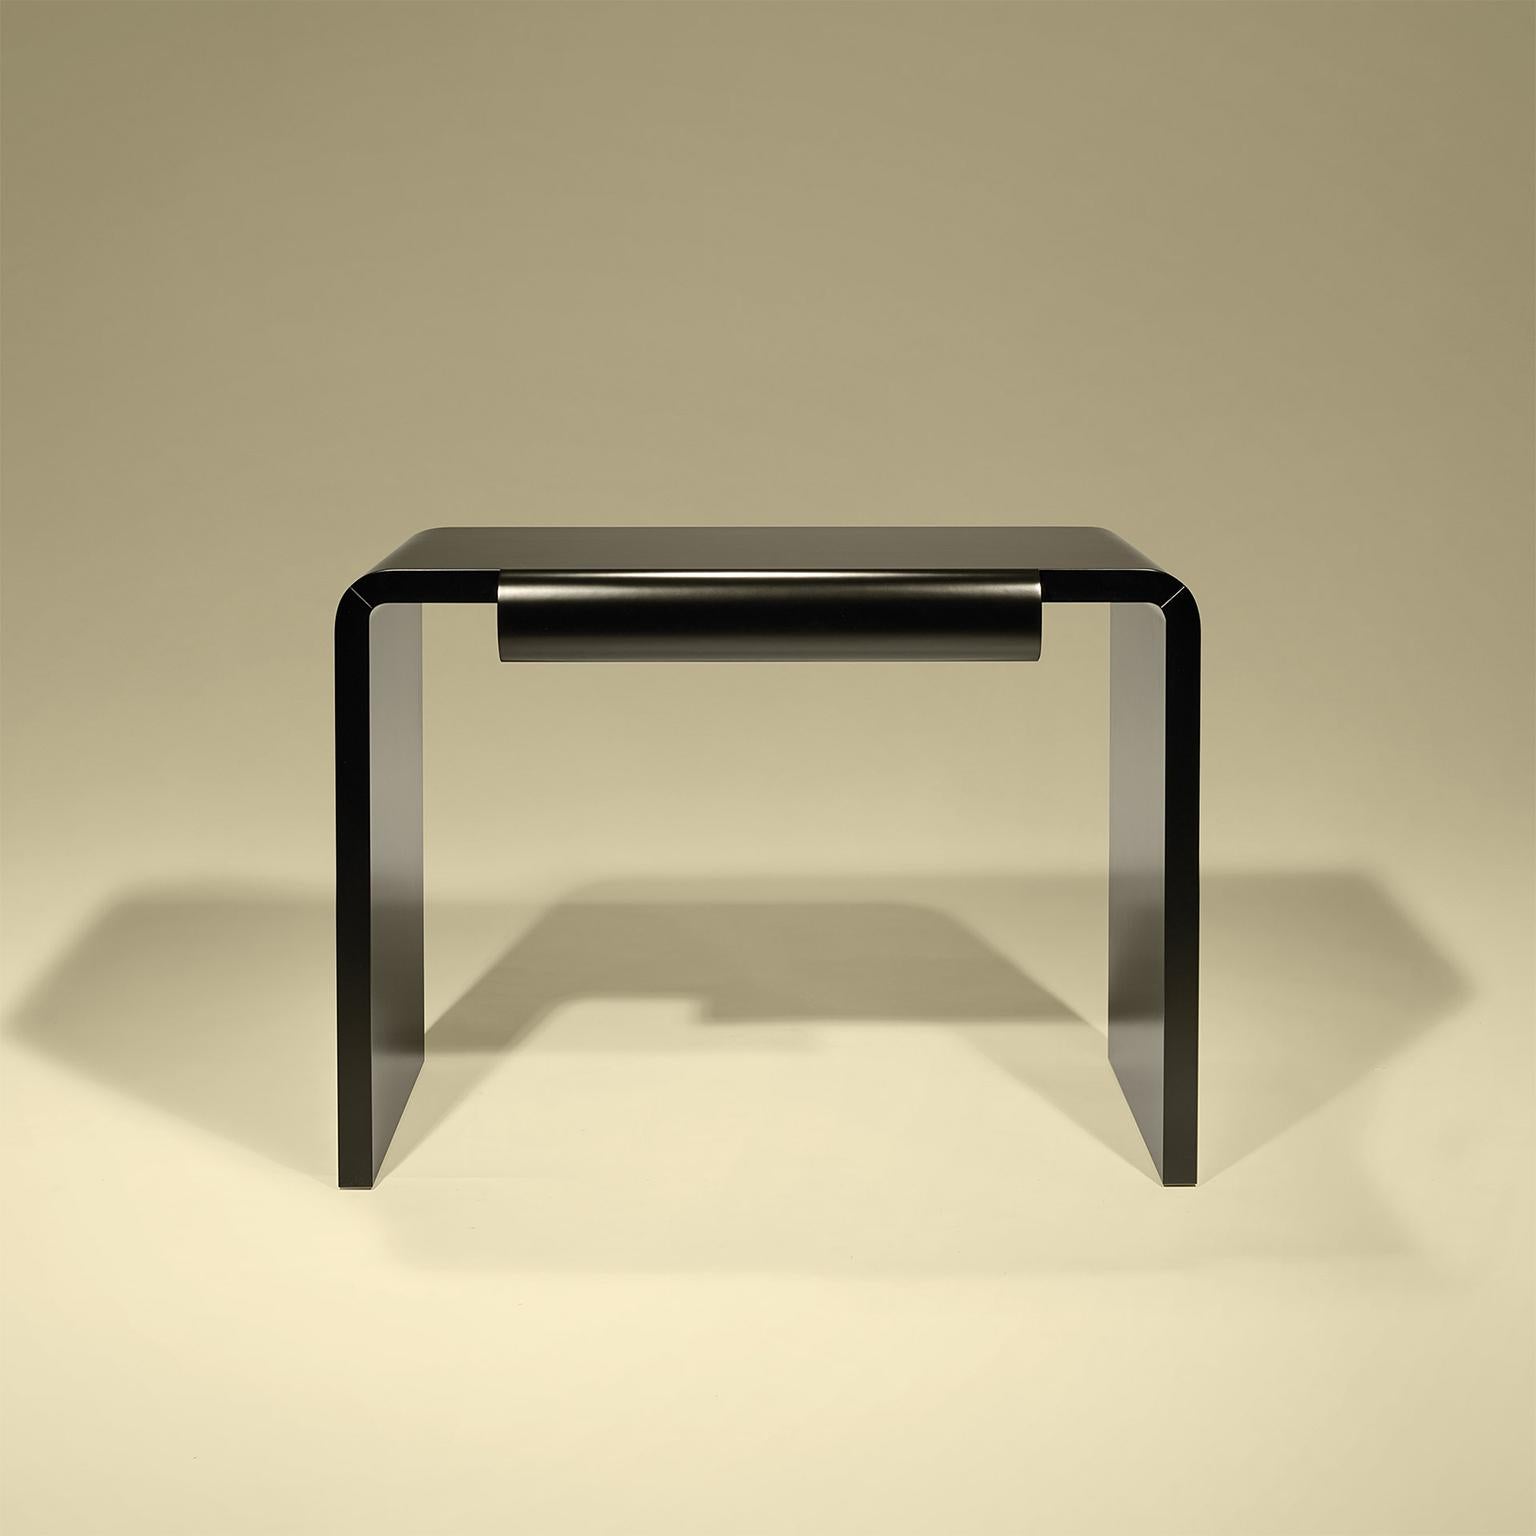 Desk in black lacquer with one drawer.

Bespoke / customizable
Identical shapes with different sizes and finishings.
All RAL colors available. (Mate / half gloss / gloss).